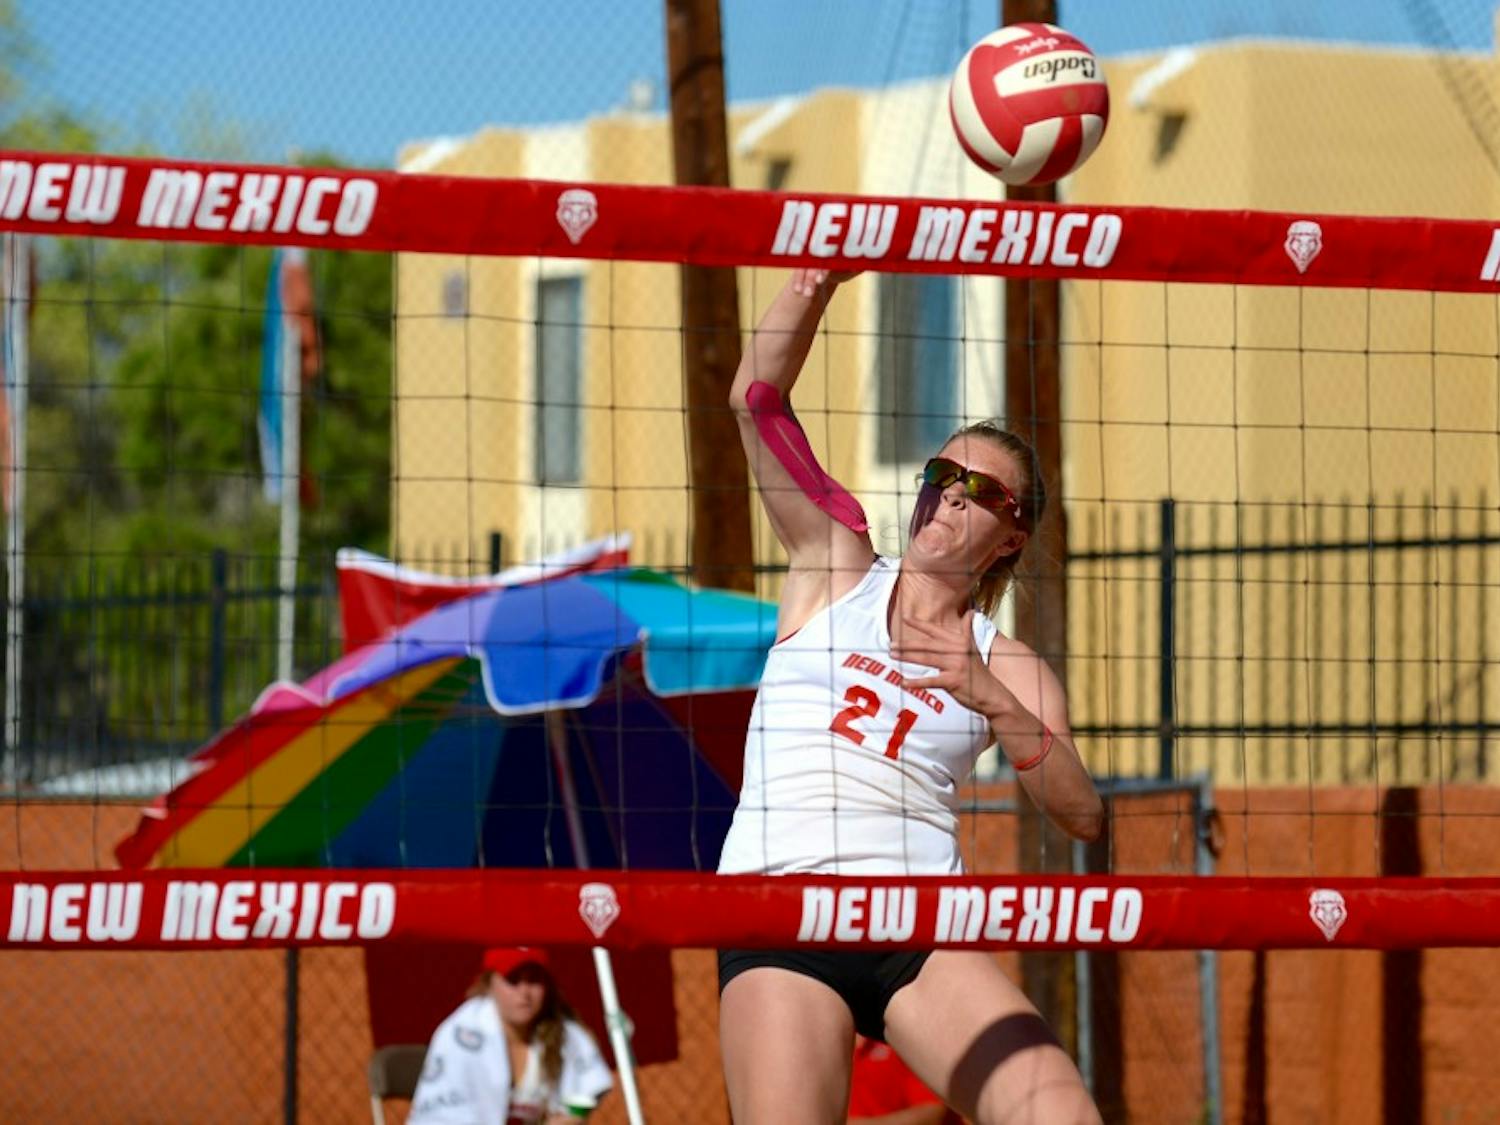 Junior&nbsp;Julia Warren sets up for a kill&nbsp;against A New Mexico State player&nbsp;Saturday afternoon&nbsp;Lucky 66 Bowl's sand volleyball courts.&nbsp;The Lobos beat the Aggies 5-0 and swept the weekend.&nbsp;